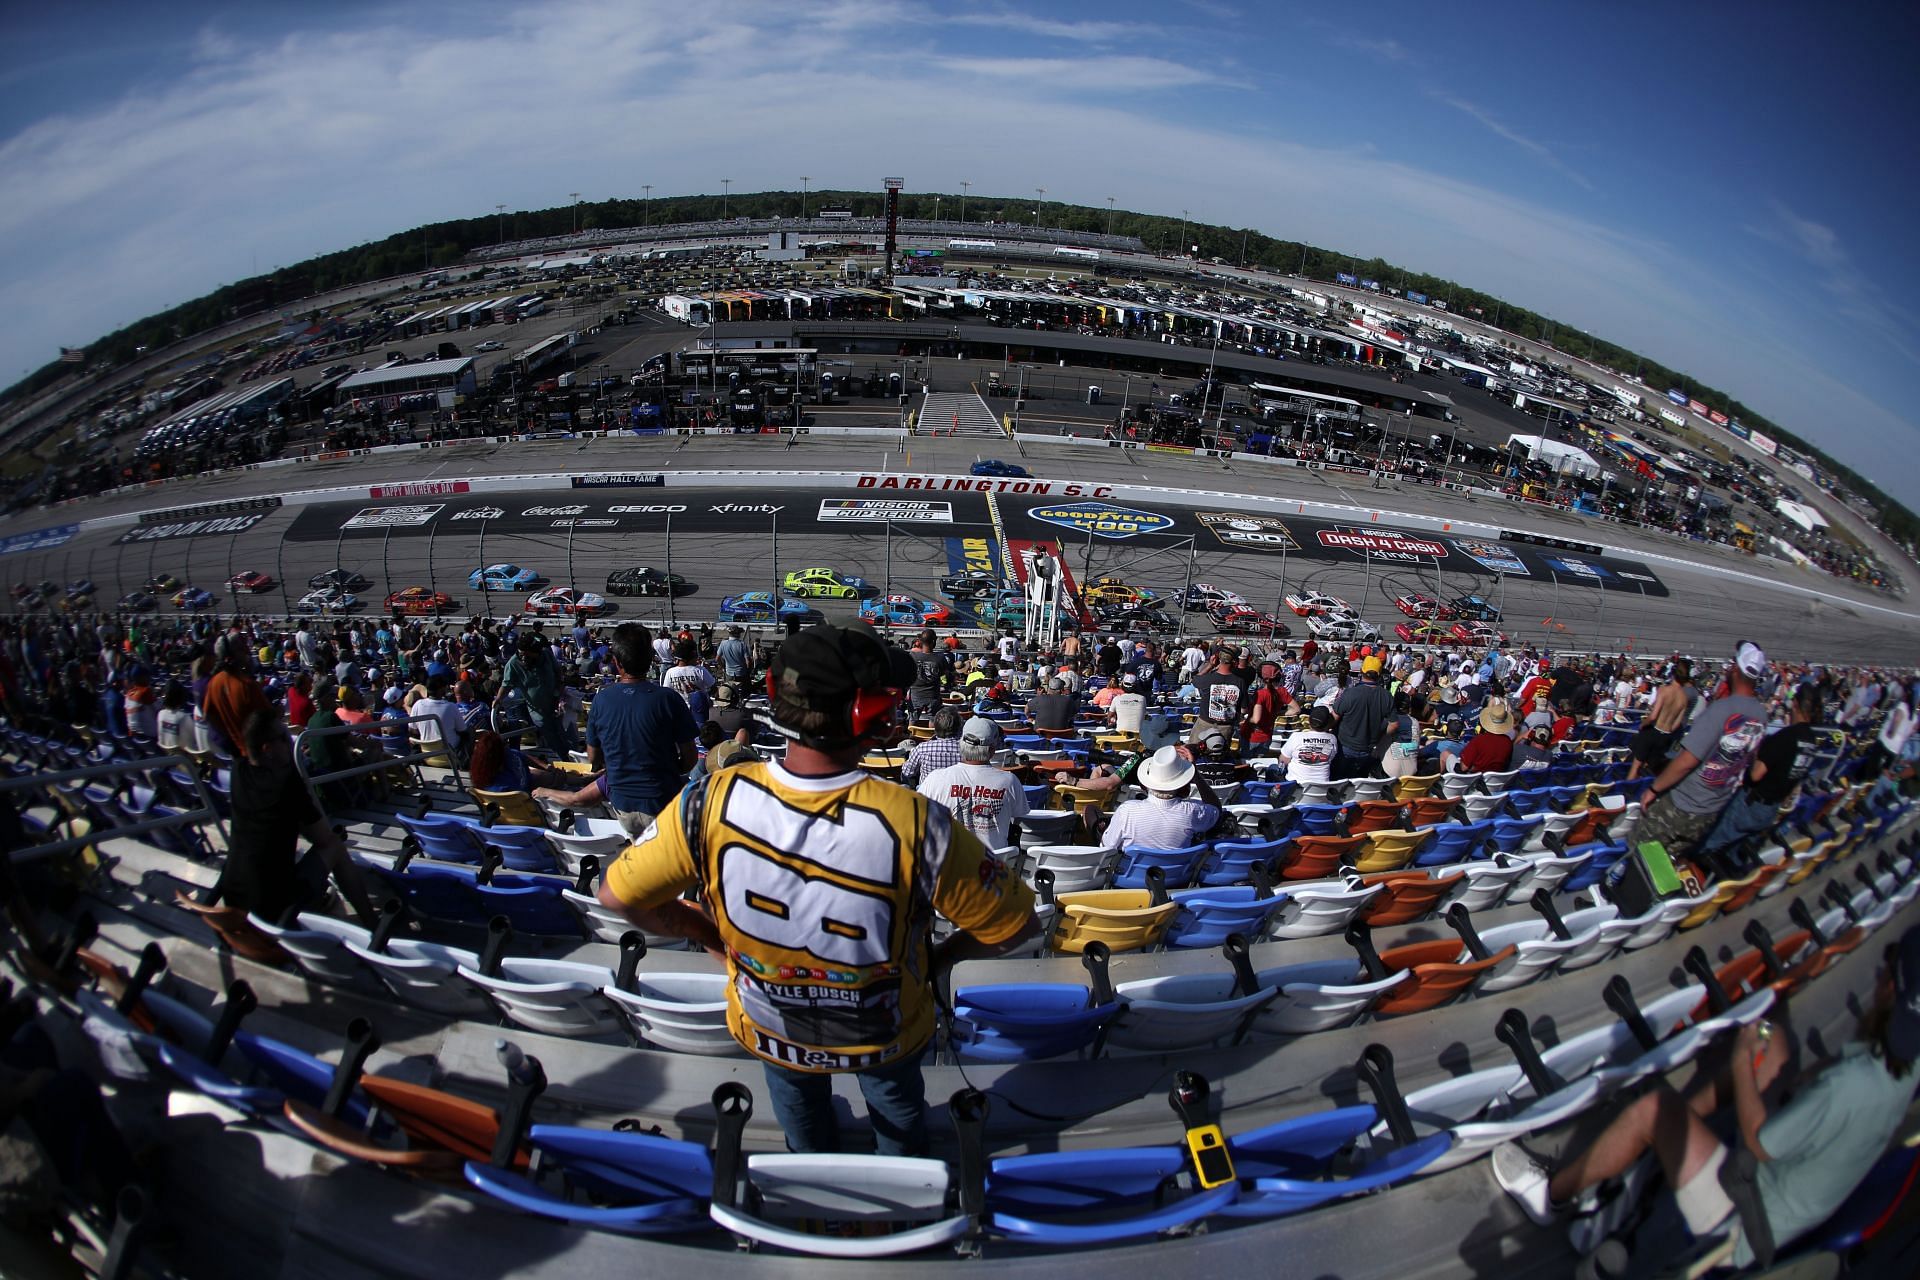 NASCAR fans look on during the NASCAR Cup Series Goodyear 400 at Darlington Raceway. (Photo by Sean Gardner/Getty Images)